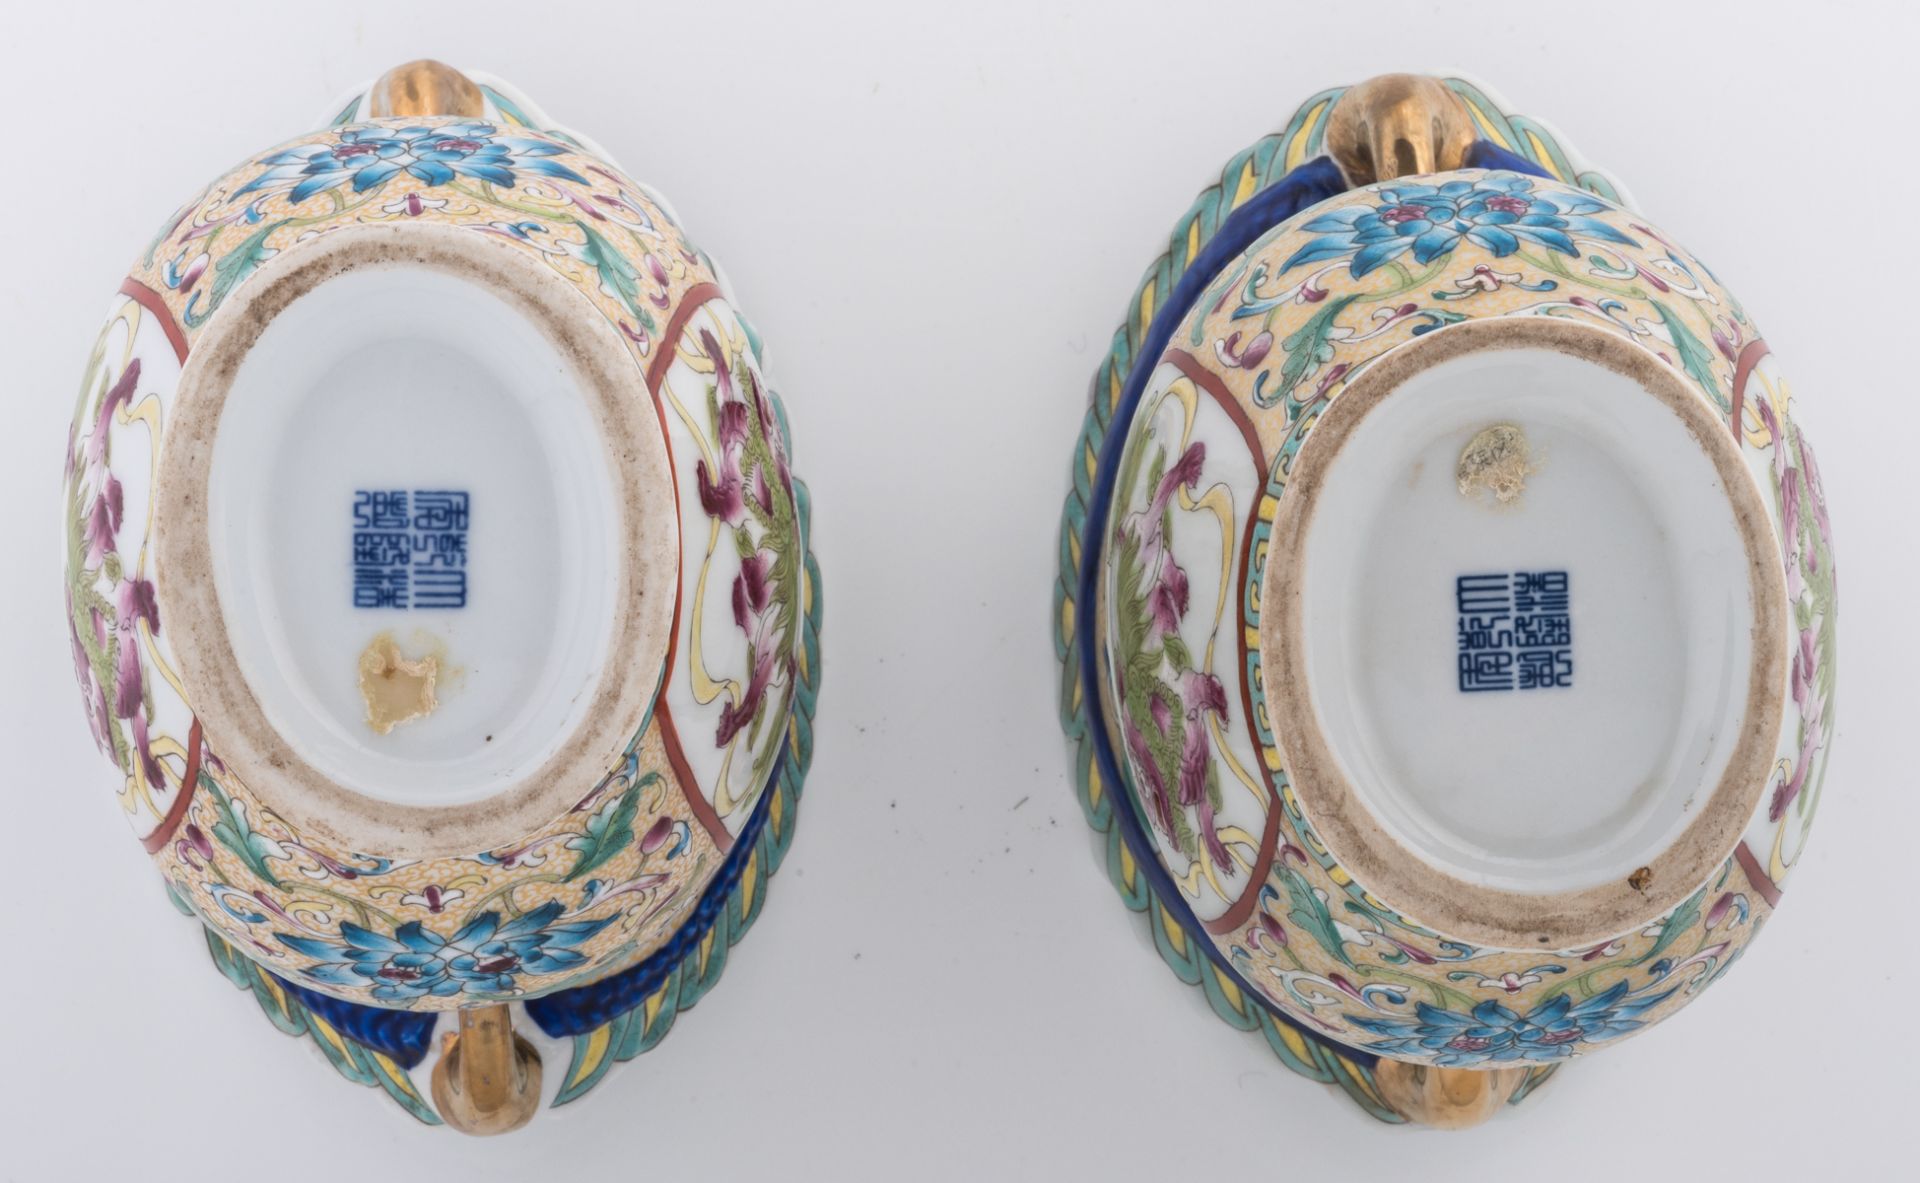 A pair of Chinese porcelain vases with polychrome enamels, decorated with flower scrolls and panels - Image 6 of 6